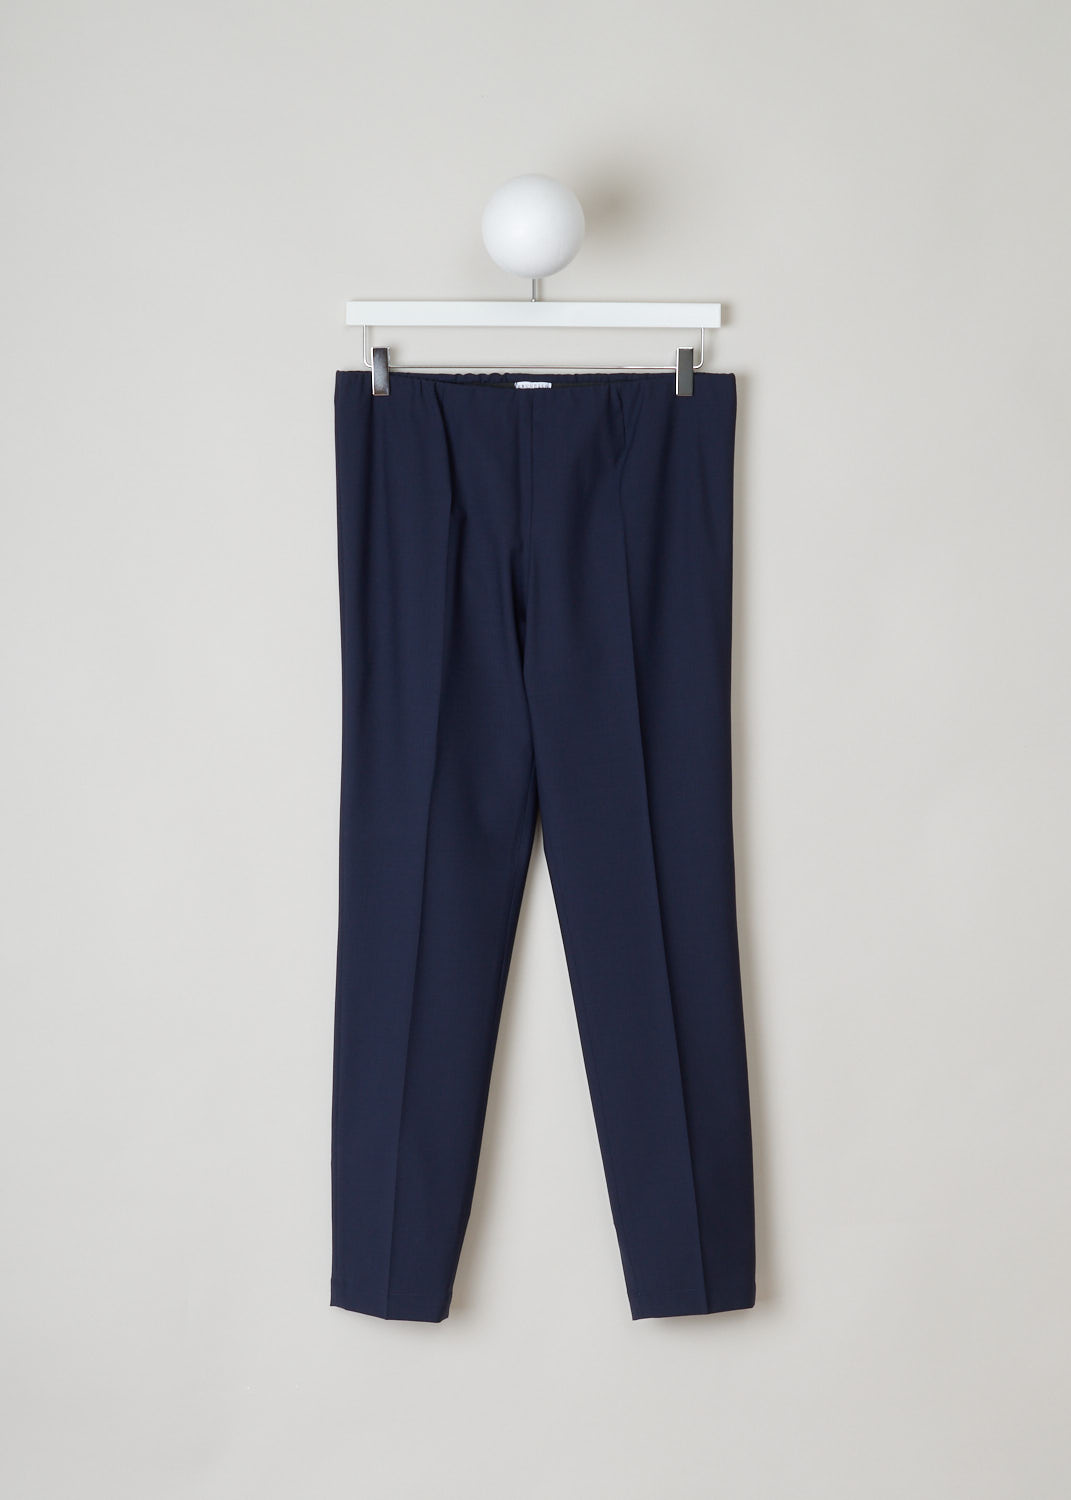 Brunello Cucinelli, straight midnight blue pants, M0W07P1794_C2831, blue, front, Empower your outfit with these minimalistic designed pants. Comes in a lightweight wool in midnight blue and charcoal grey. These low-cut pants have a slim fit and slightly tapered legs.
A concealed elasticated waistband and closes with an invisible zip on the side.